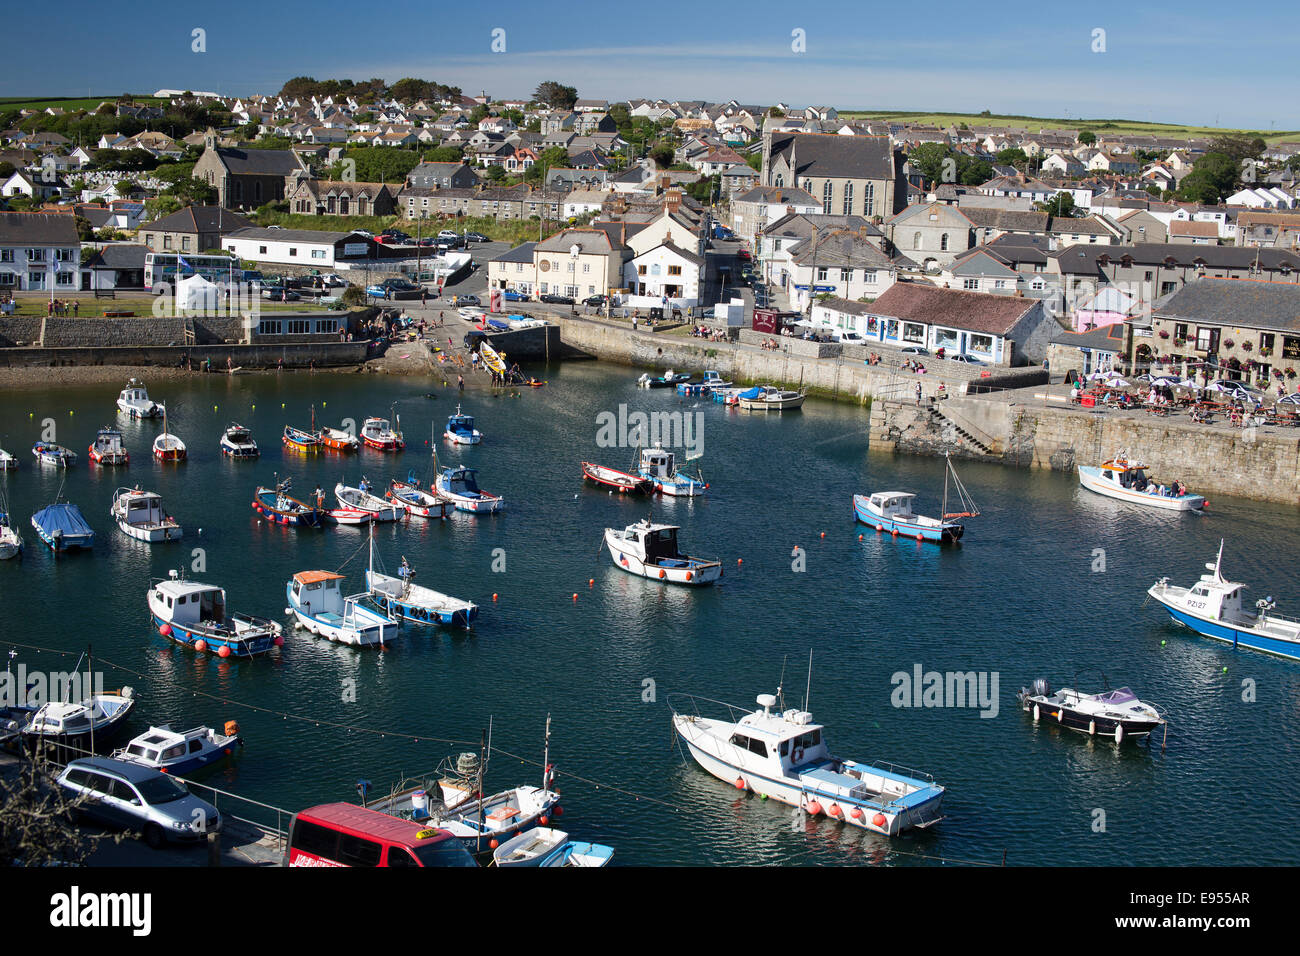 Porthleven harbour with small fishing and pleasure boats, the quay and town is spread behind, Cornwall, England, UK. Stock Photo